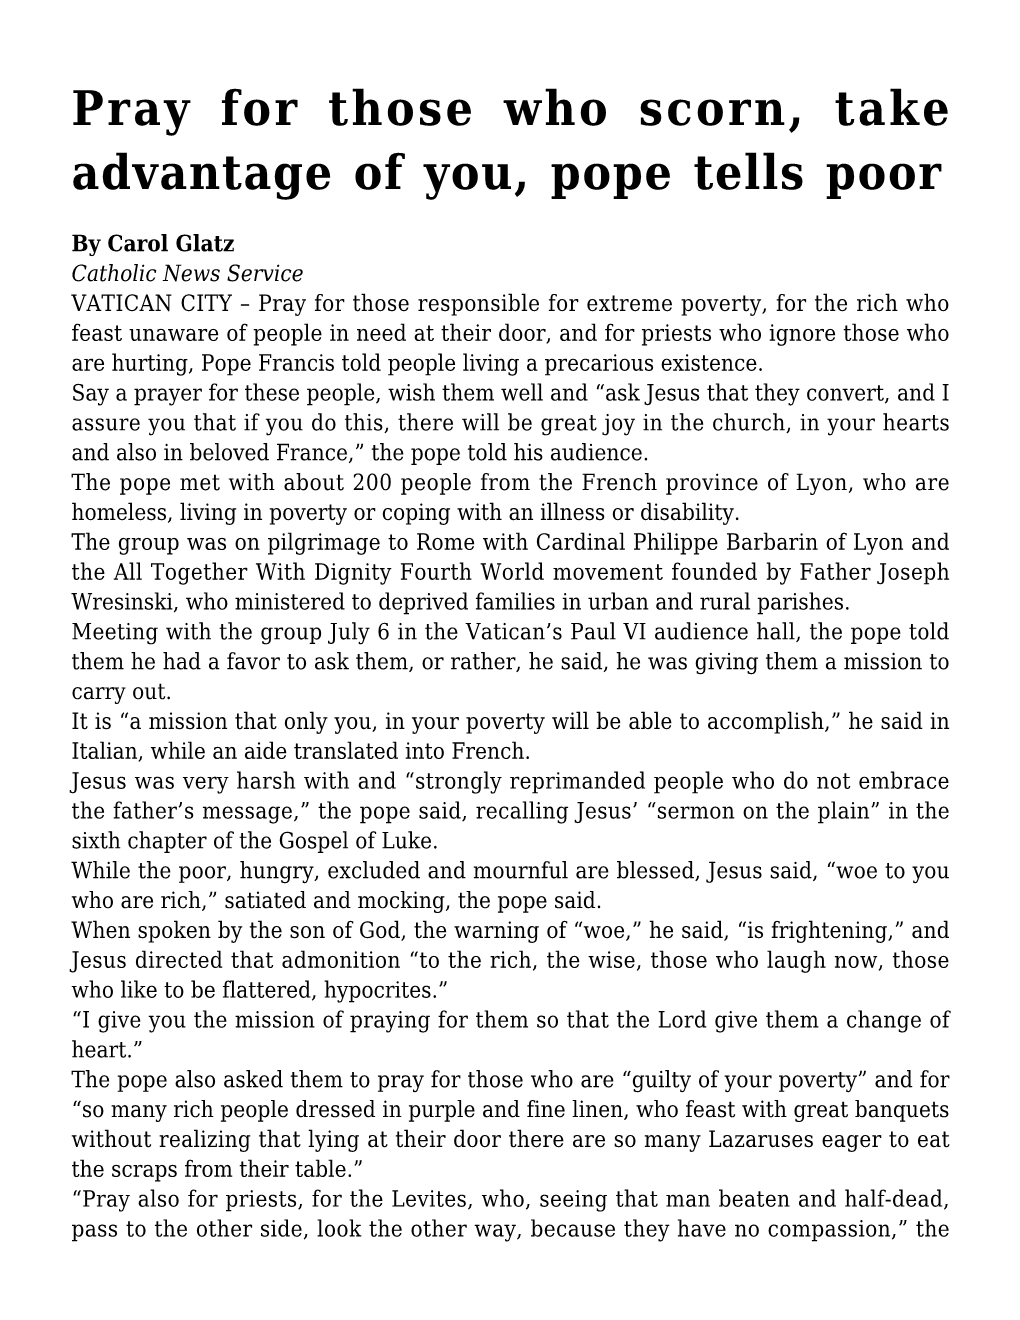 Pray for Those Who Scorn, Take Advantage of You, Pope Tells Poor